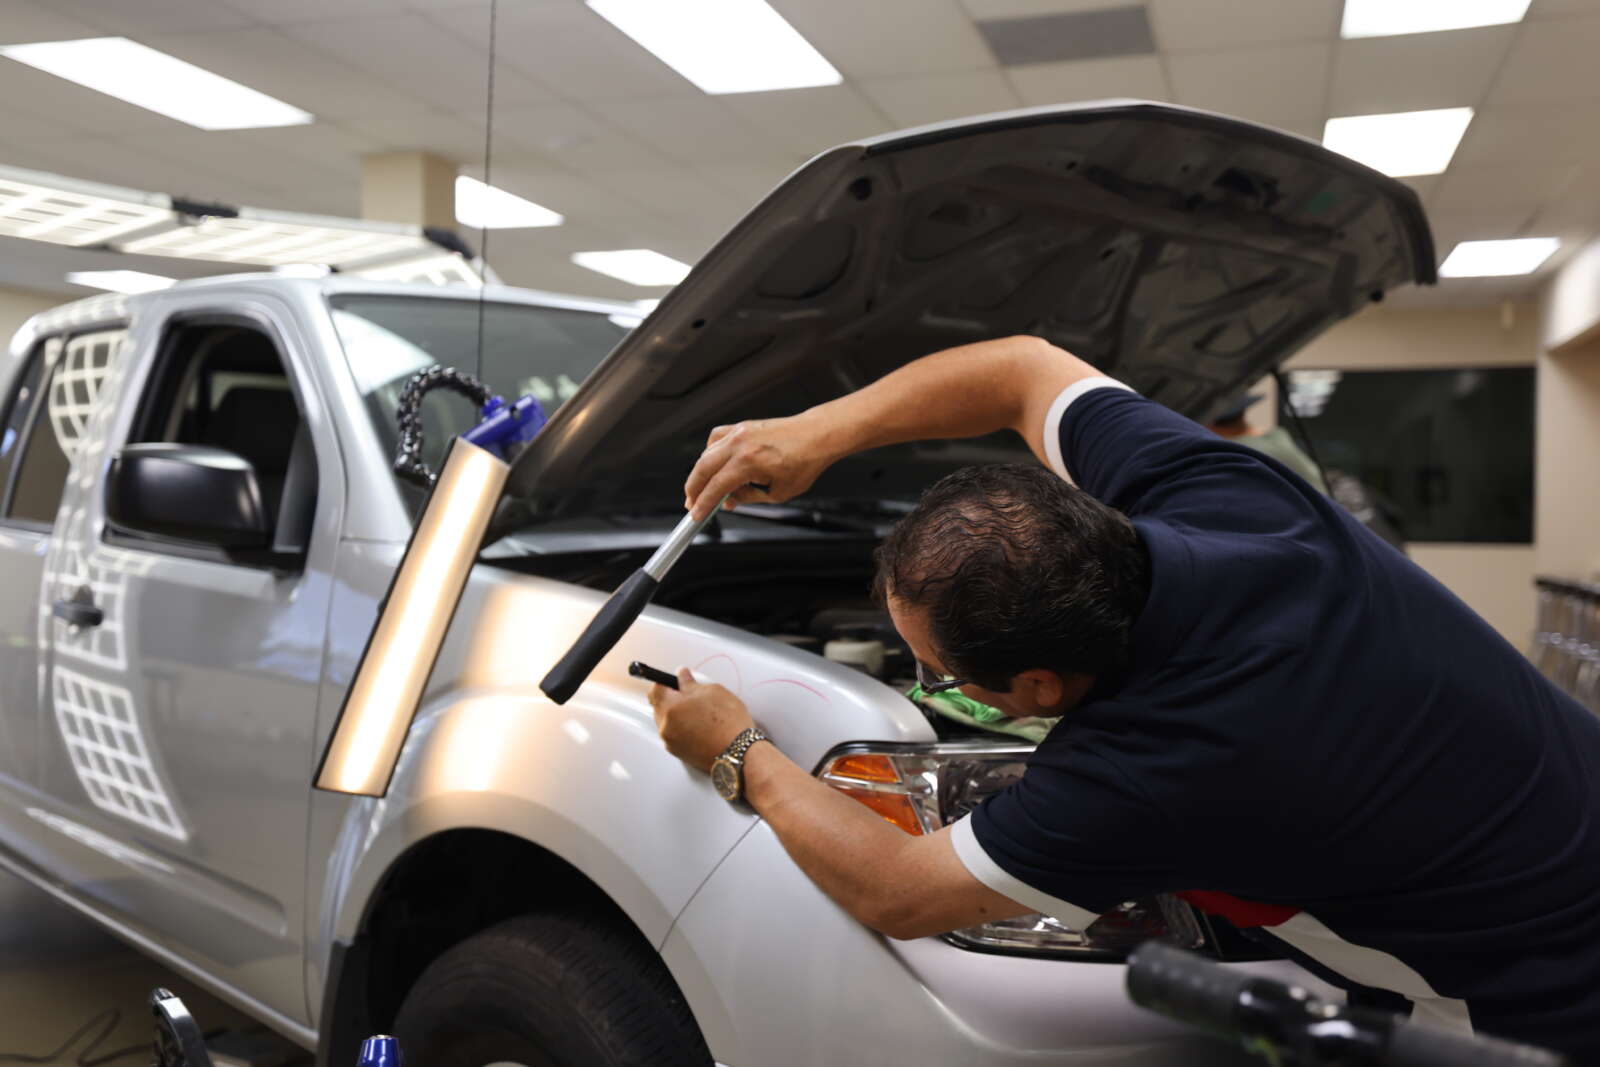 A man is training on the paintless dent repair technique while working on the fender of a car.